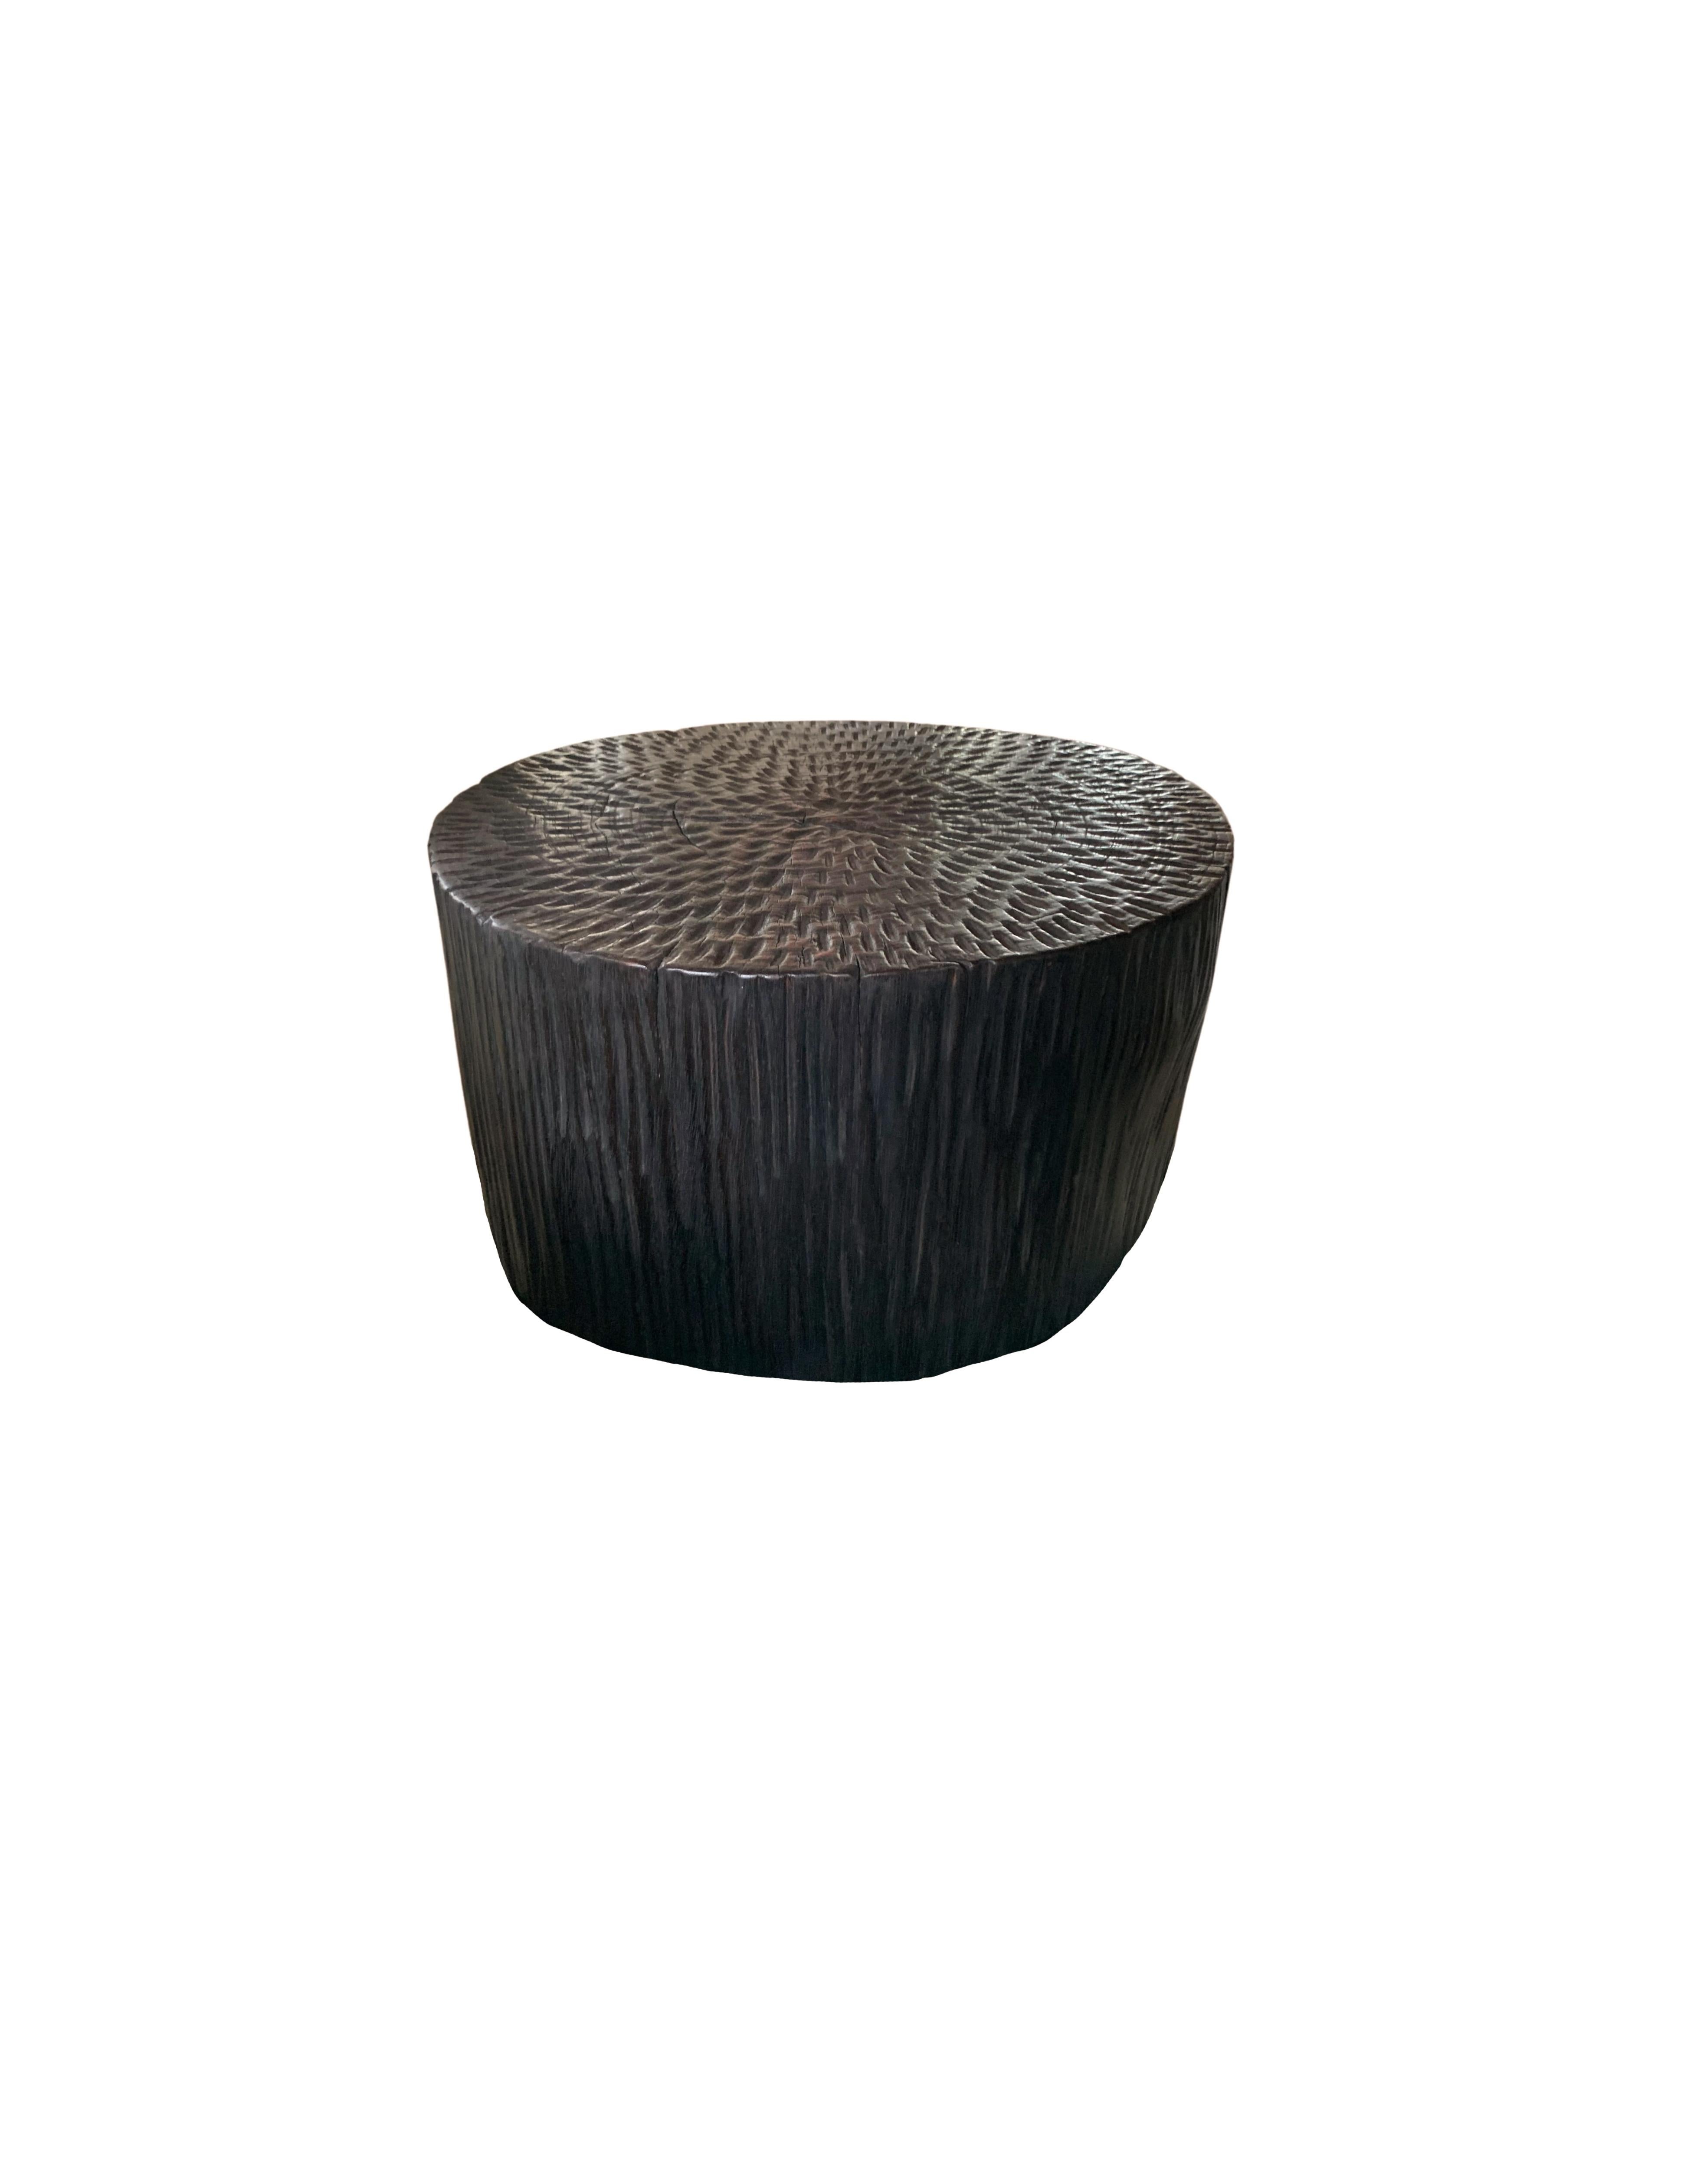 Indonesian Sculptural Side Table Mango Wood, Hand-Hewn Detailing Modern Organic For Sale